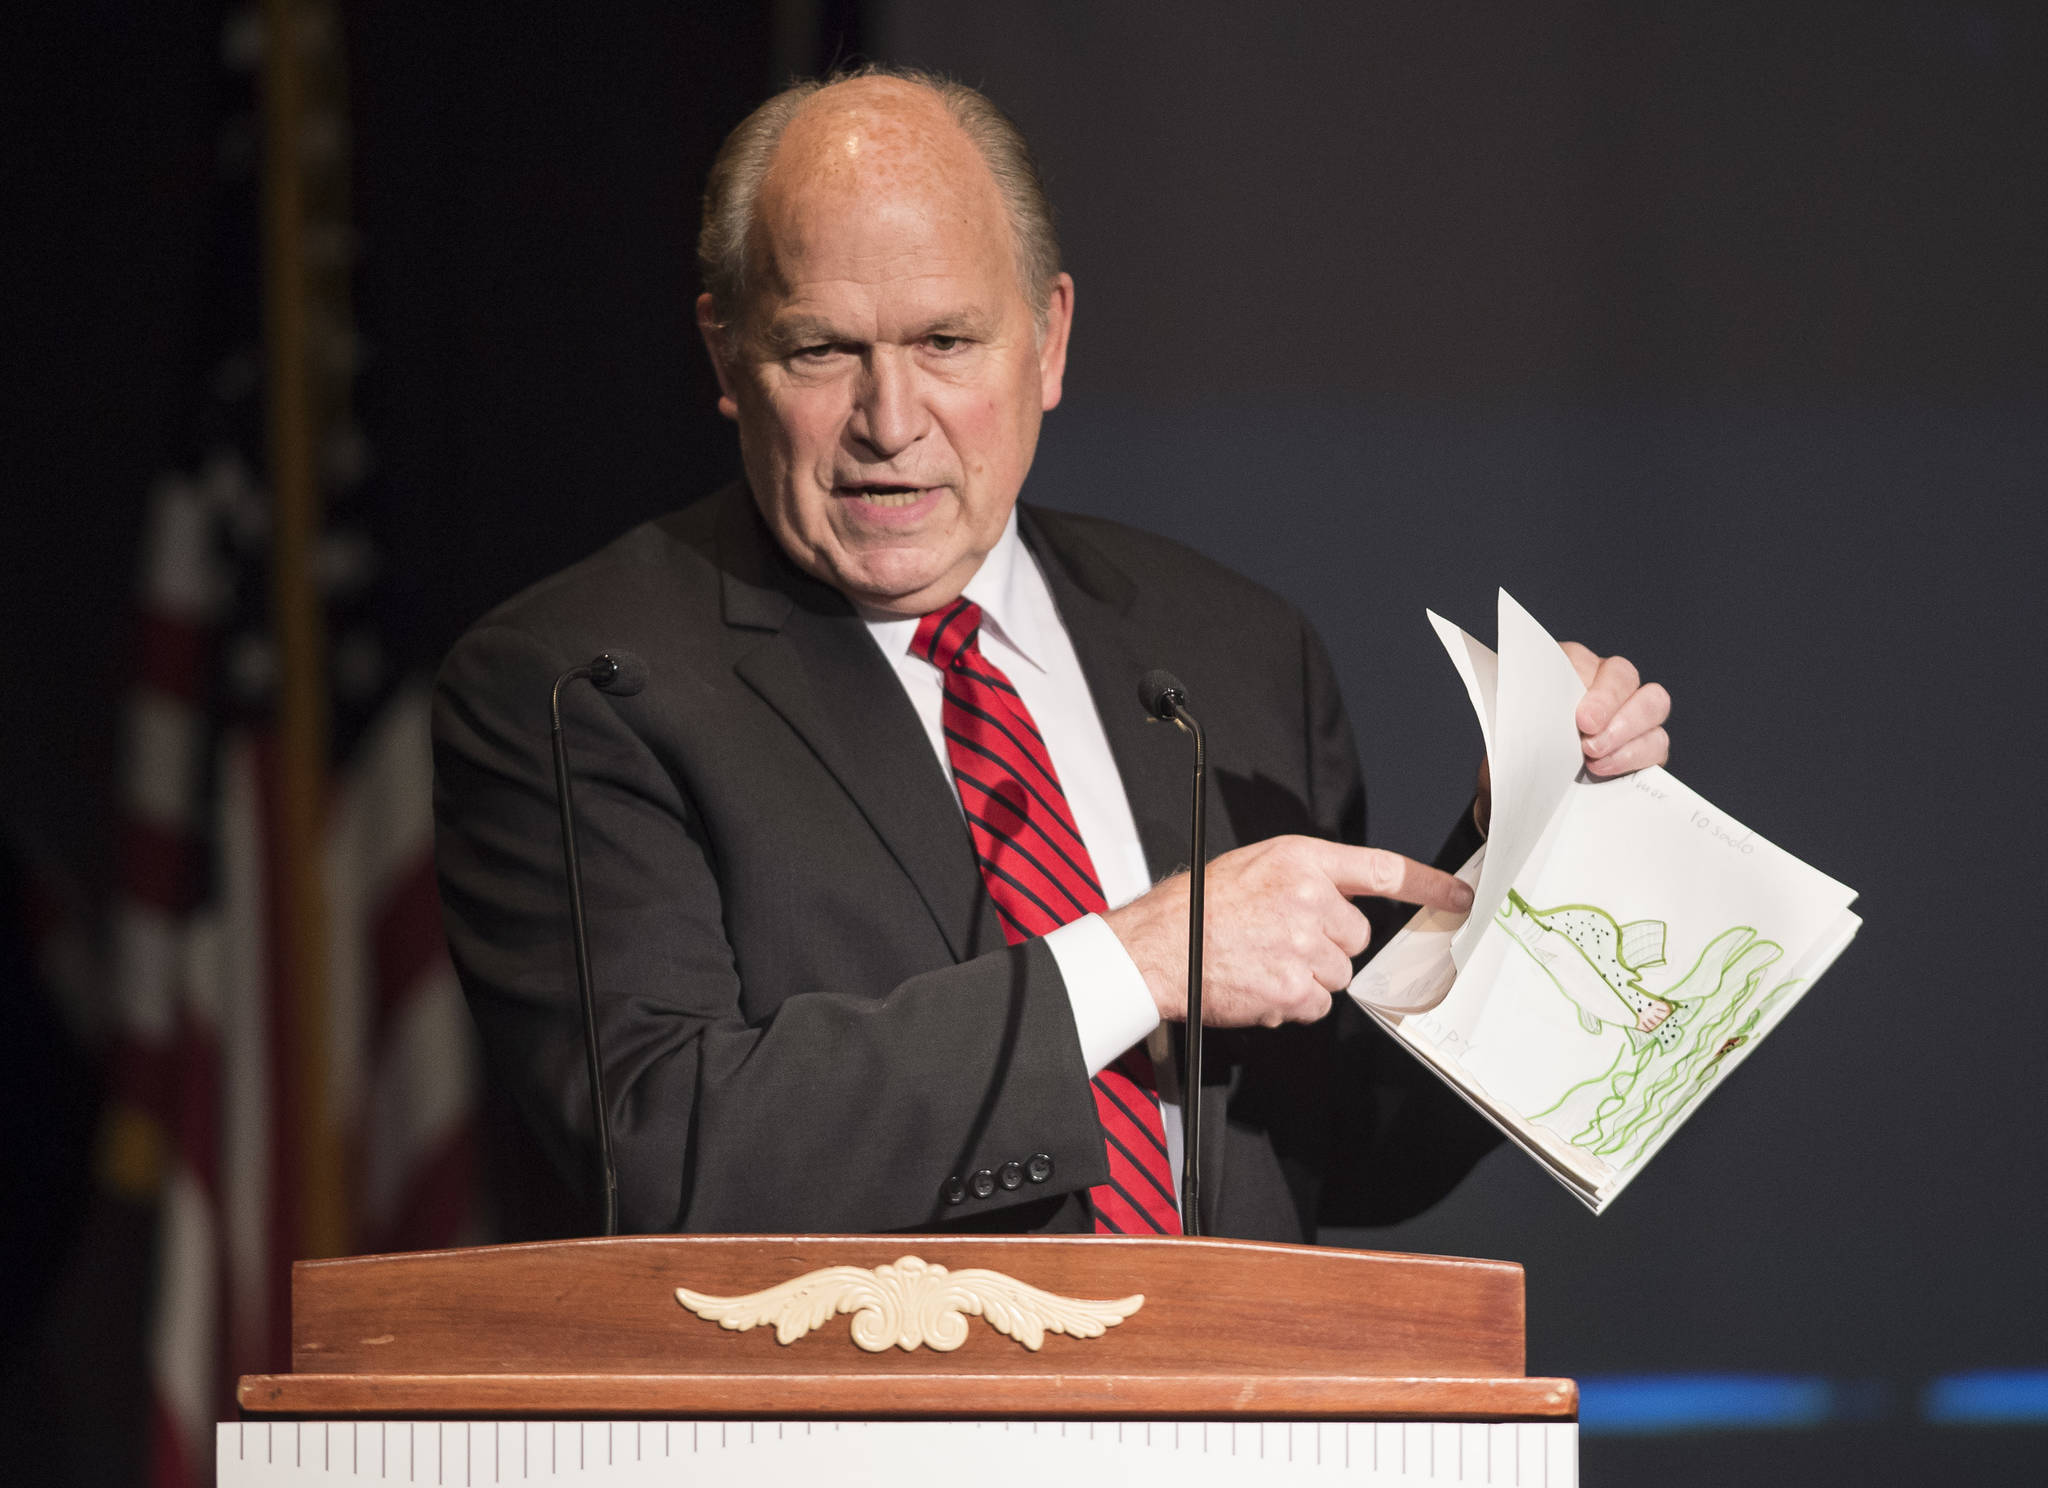 Gov. Bill Walker gives his opening remarks and shows off his granddaughters artwork at the 2018 Governor’s Arts & Humanities Awards at the Juneau Arts & Culture Center on Thursday, Feb. 8, 2018. (Michael Penn | Juneau Empire)